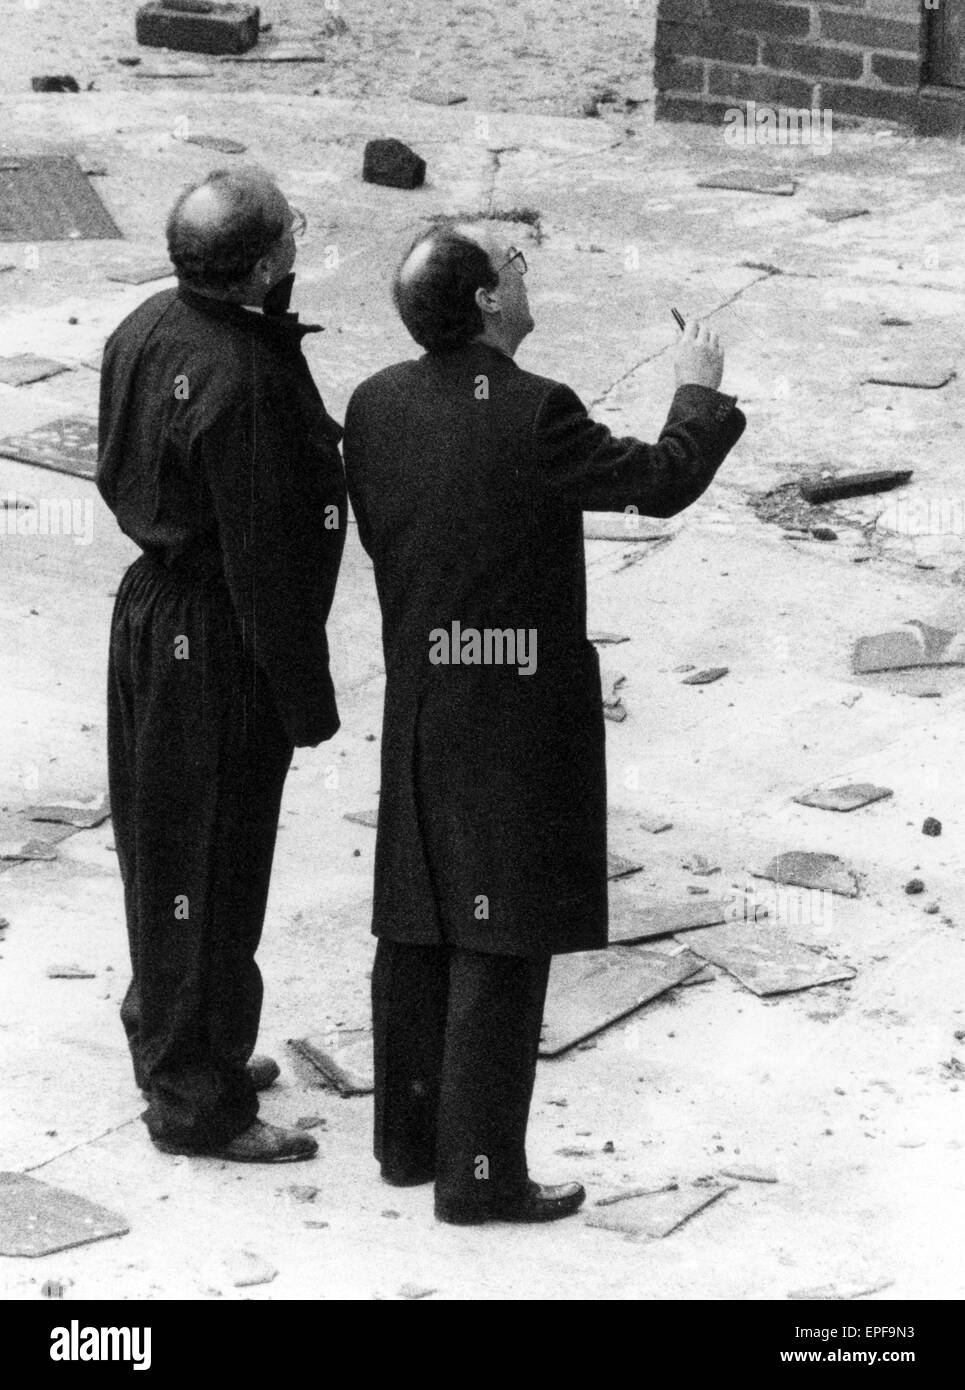 Strangeways Prison Riot April 1990. MEN Editor Michael Unger (right) talks to prisoners, Prison Officer (left) provides escort.  A 25-day prison riot and rooftop protest at Strangeways Prison in Manchester, England. The riot began on the 1st April 1990 wh Stock Photo